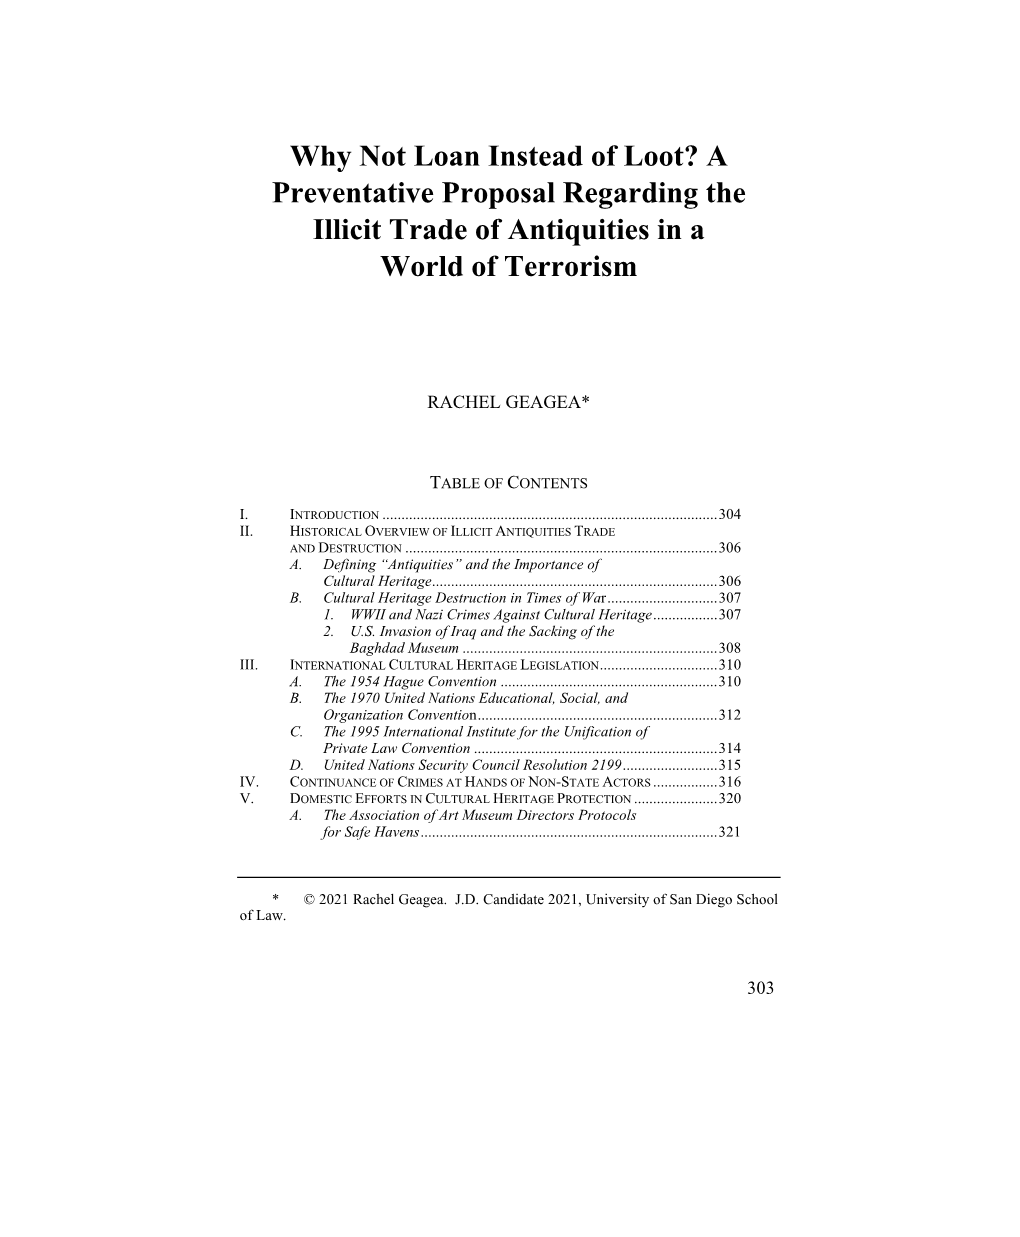 Why Not Loan Instead of Loot? a Preventative Proposal Regarding the Illicit Trade of Antiquities in a World of Terrorism